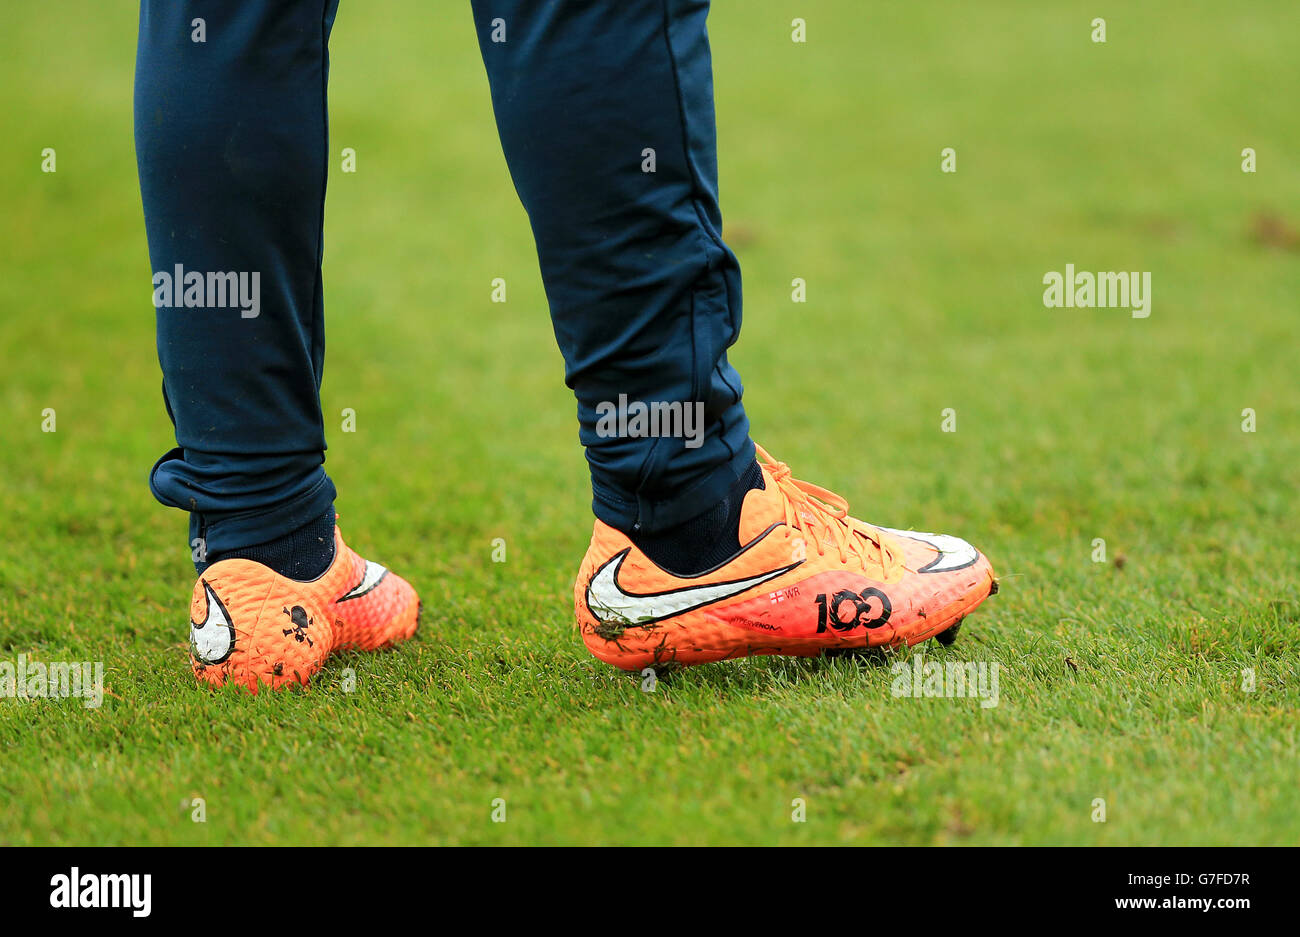 The personalised Nike football boots of England's Wayne Rooney during a  training session at St. George's Park, Burton-Upon-Trent. PRESS ASSOCIATION  Photo. Picture date: Friday November 14, 2014. See PA story SOCCER England.